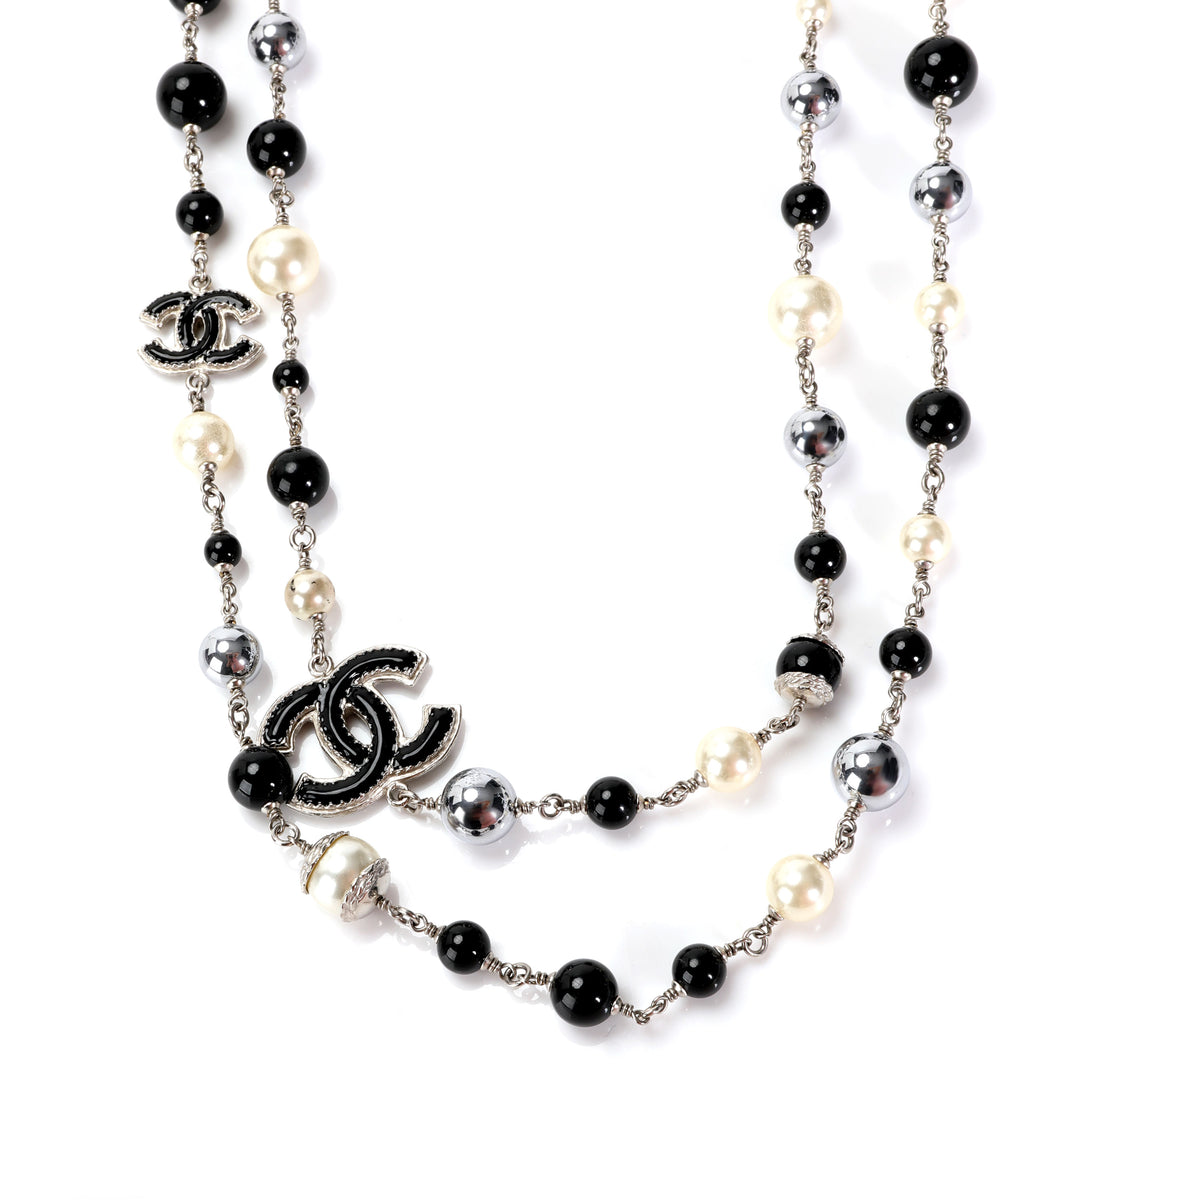 Chanel Black and White Bead Necklace With CC Logo, myGemma